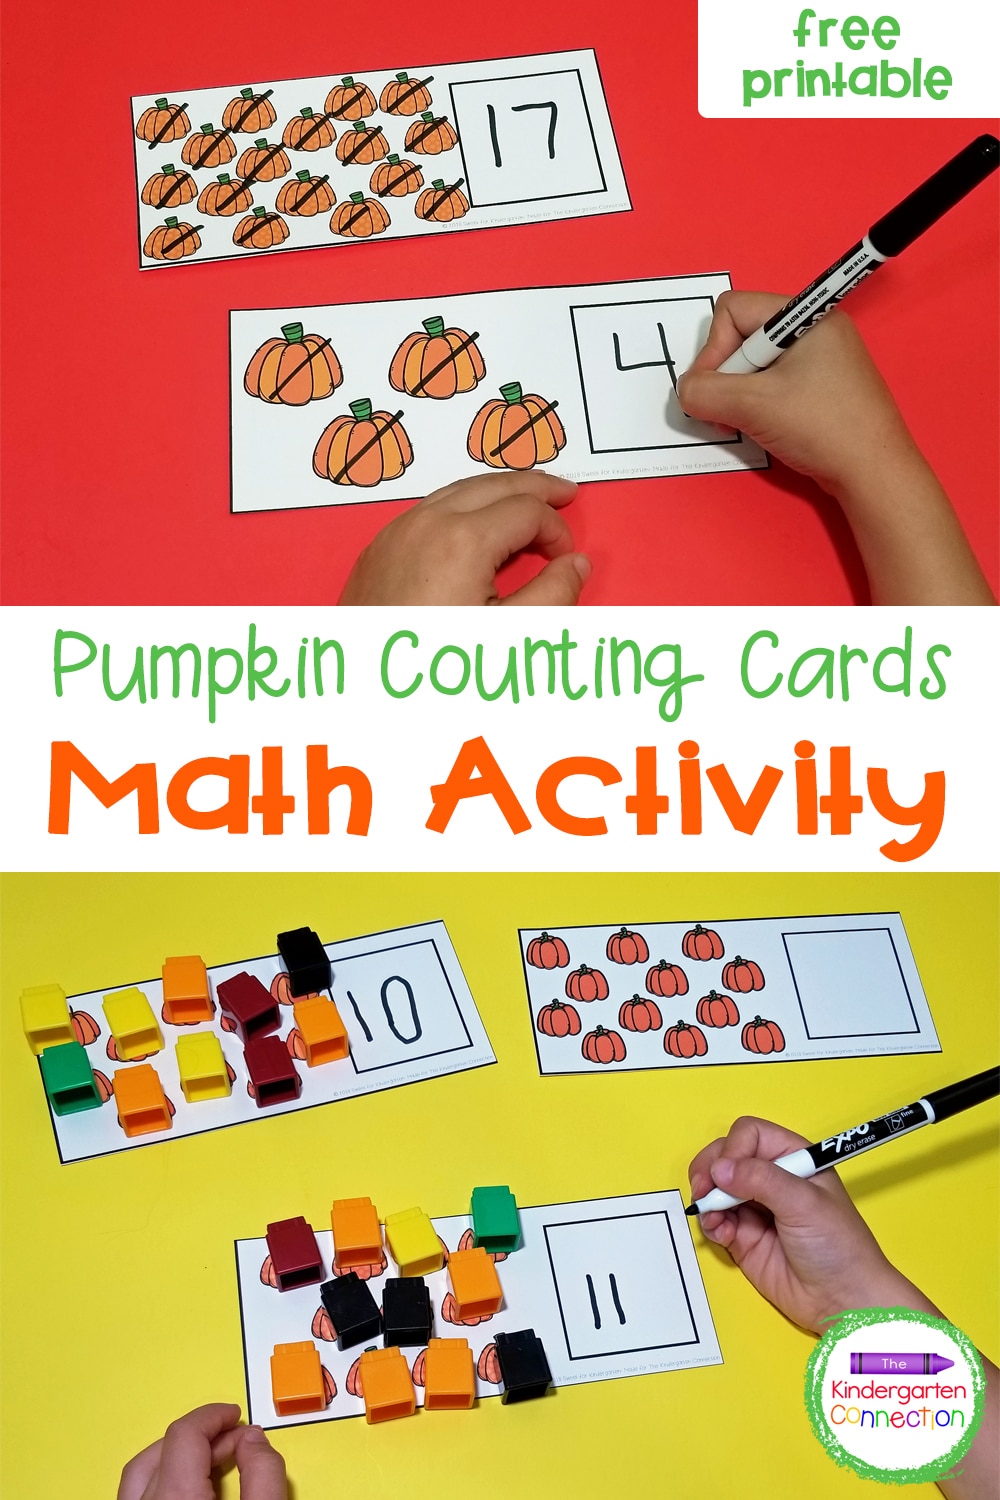 Grab our free Dry Erase Pumpkin Counting Cards for your Pre-K or Kindergarten math centers. Kids will have fun working on counting skills!